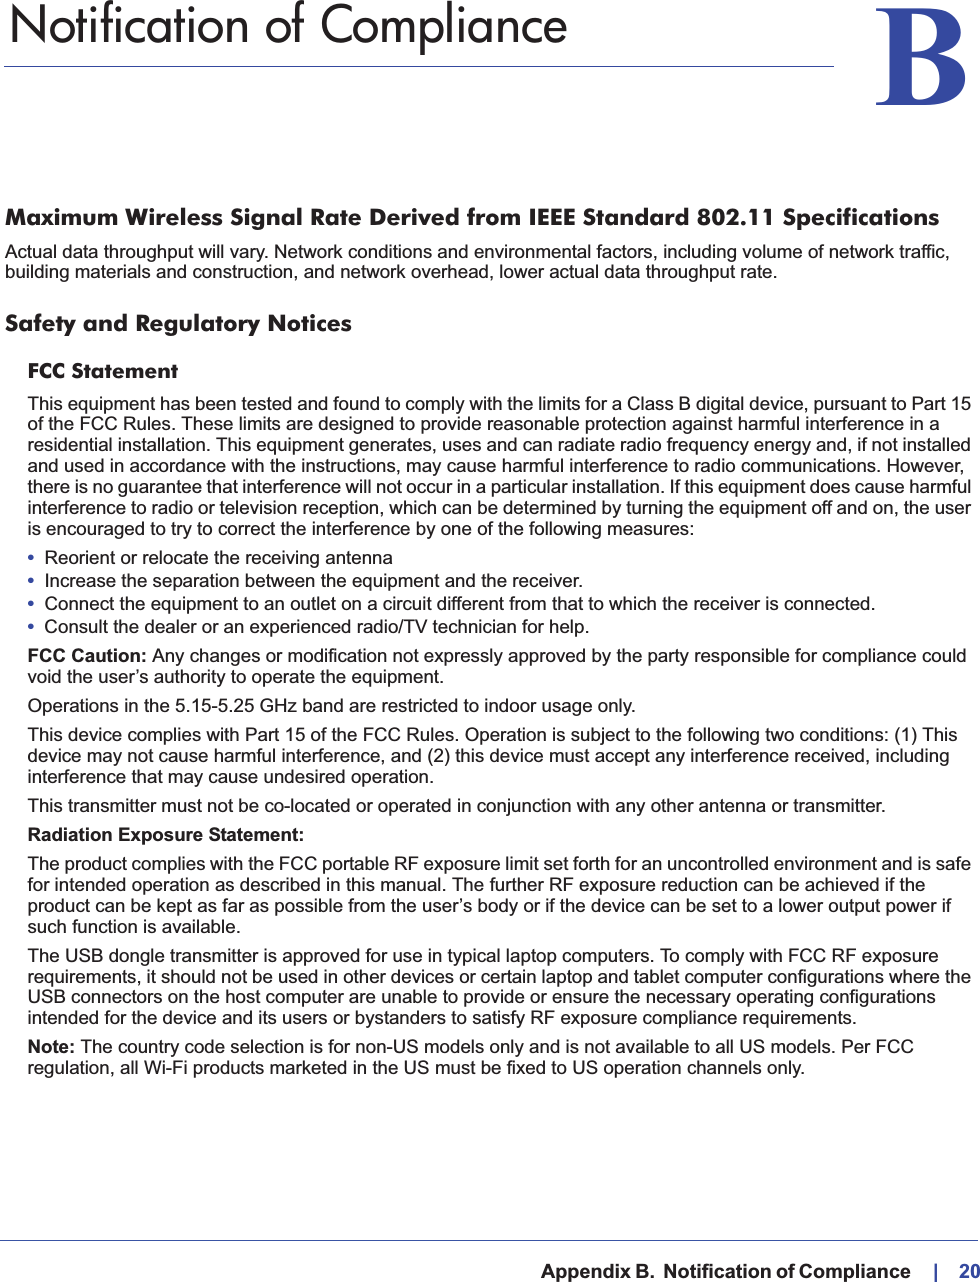   Appendix B.  Notification of Compliance    |    20BB.   Notification of ComplianceMaximum Wireless Signal Rate Derived from IEEE Standard 802.11 SpecificationsActual data throughput will vary. Network conditions and environmental factors, including volume of network traffic, building materials and construction, and network overhead, lower actual data throughput rate.Safety and Regulatory NoticesFCC Statement This equipment has been tested and found to comply with the limits for a Class B digital device, pursuant to Part 15 of the FCC Rules. These limits are designed to provide reasonable protection against harmful interference in a residential installation. This equipment generates, uses and can radiate radio frequency energy and, if not installed and used in accordance with the instructions, may cause harmful interference to radio communications. However, there is no guarantee that interference will not occur in a particular installation. If this equipment does cause harmful interference to radio or television reception, which can be determined by turning the equipment off and on, the user is encouraged to try to correct the interference by one of the following measures:•Reorient or relocate the receiving antenna •Increase the separation between the equipment and the receiver. •Connect the equipment to an outlet on a circuit different from that to which the receiver is connected.•Consult the dealer or an experienced radio/TV technician for help.FCC Caution: Any changes or modification not expressly approved by the party responsible for compliance could void the user’s authority to operate the equipment.Operations in the 5.15-5.25 GHz band are restricted to indoor usage only.This device complies with Part 15 of the FCC Rules. Operation is subject to the following two conditions: (1) This device may not cause harmful interference, and (2) this device must accept any interference received, including interference that may cause undesired operation.This transmitter must not be co-located or operated in conjunction with any other antenna or transmitter.Radiation Exposure Statement:The product complies with the FCC portable RF exposure limit set forth for an uncontrolled environment and is safe for intended operation as described in this manual. The further RF exposure reduction can be achieved if the product can be kept as far as possible from the user’s body or if the device can be set to a lower output power if such function is available.The USB dongle transmitter is approved for use in typical laptop computers. To comply with FCC RF exposure requirements, it should not be used in other devices or certain laptop and tablet computer configurations where the USB connectors on the host computer are unable to provide or ensure the necessary operating configurations intended for the device and its users or bystanders to satisfy RF exposure compliance requirements.Note: The country code selection is for non-US models only and is not available to all US models. Per FCC regulation, all Wi-Fi products marketed in the US must be fixed to US operation channels only.